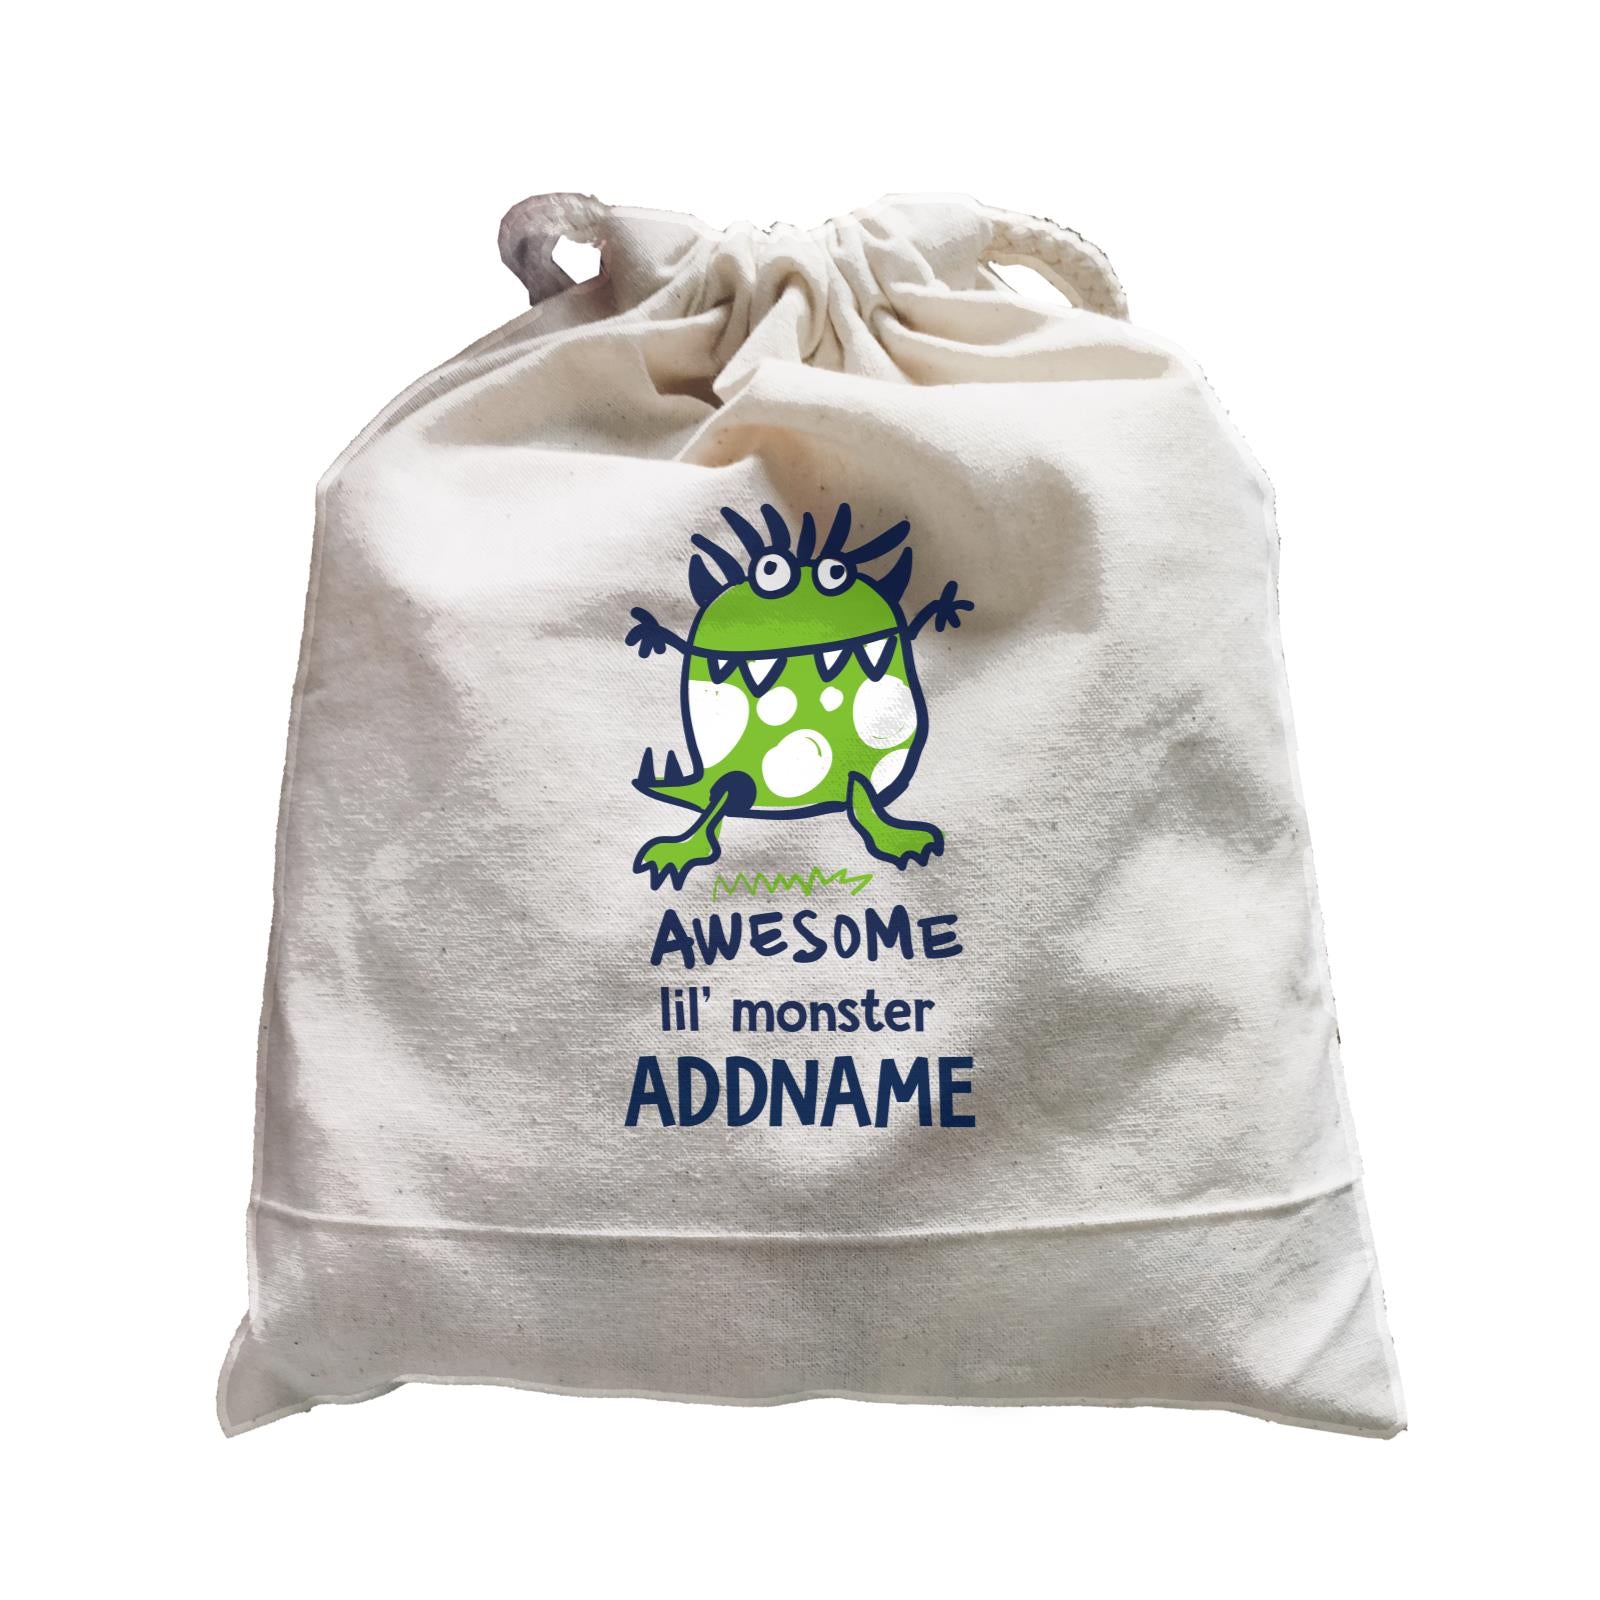 Cool Vibrant Series Awesome Lil' Monster Addname Satchel